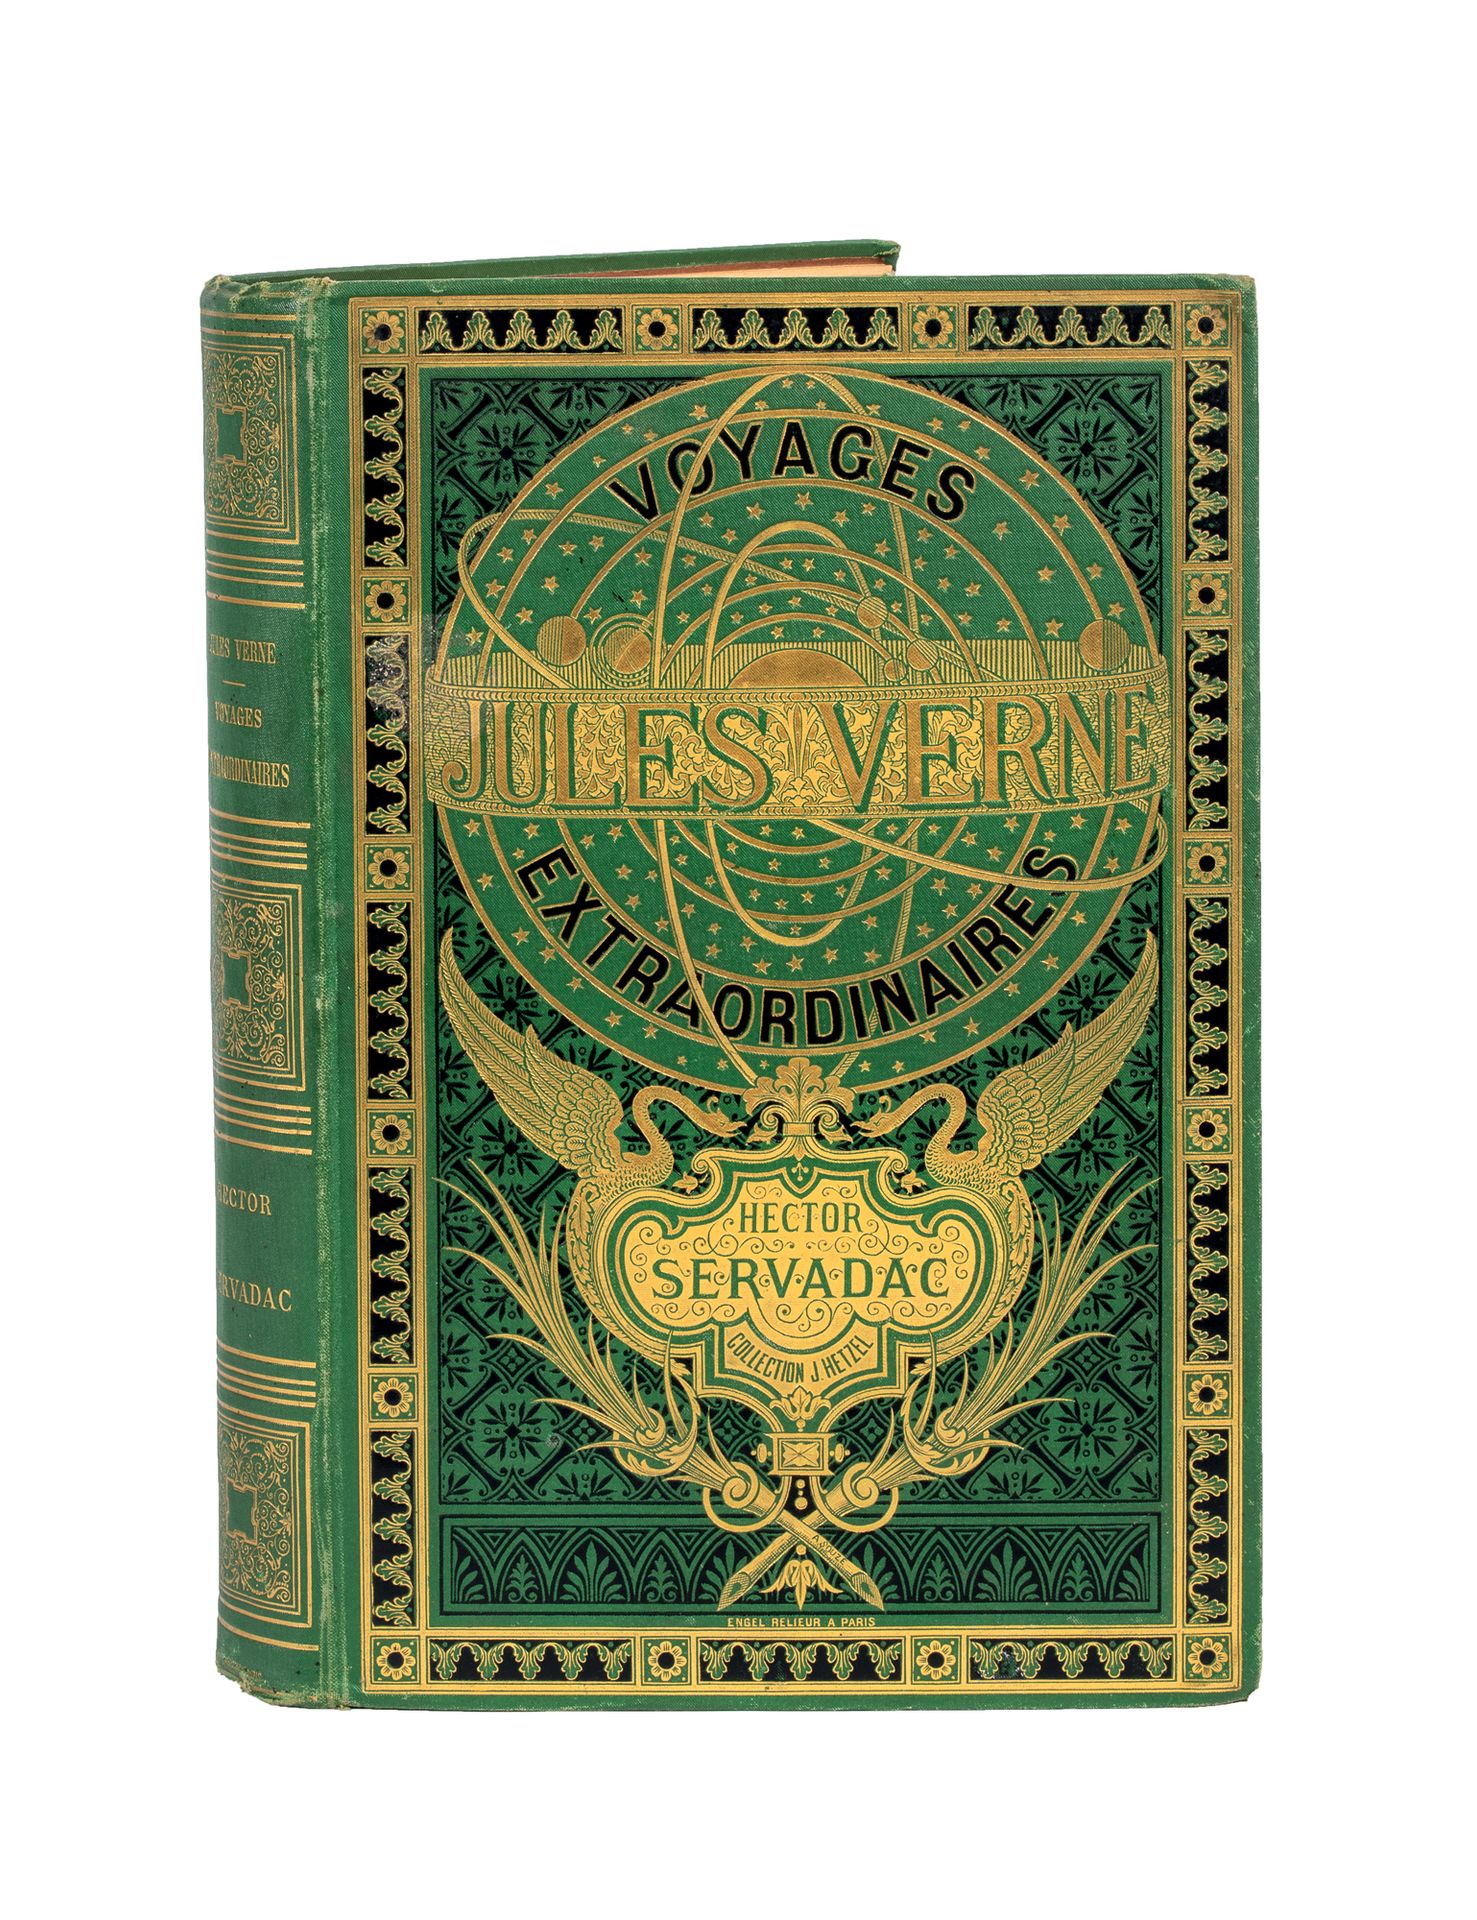 Null Celestial Spaces] Hector Servadac by Jules Verne. Illustrations by P. Phili&hellip;